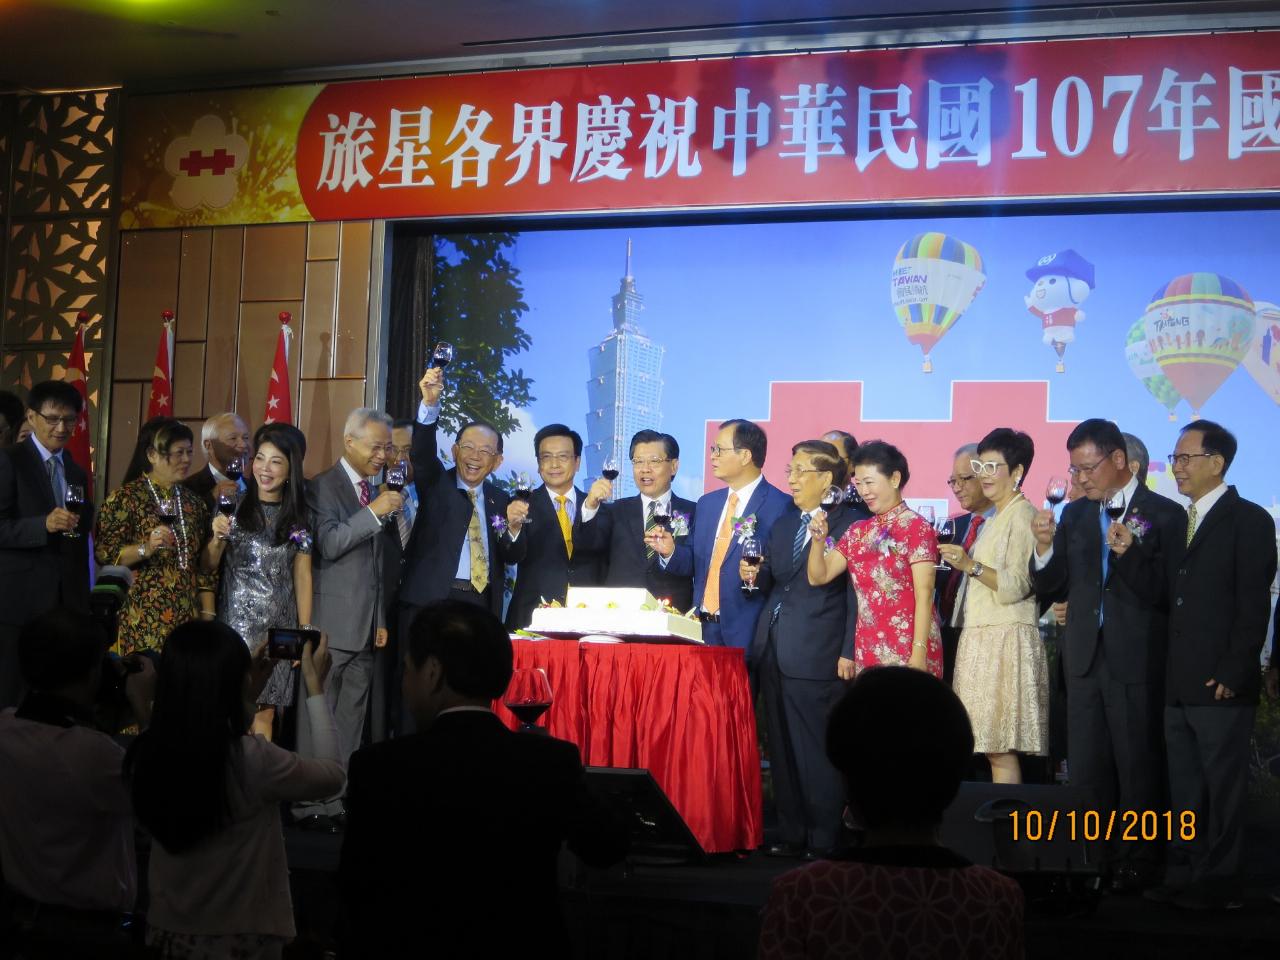 Representative Francis Liang (center) leading the “Yam Seng” toast with members of the Organizing Committee.